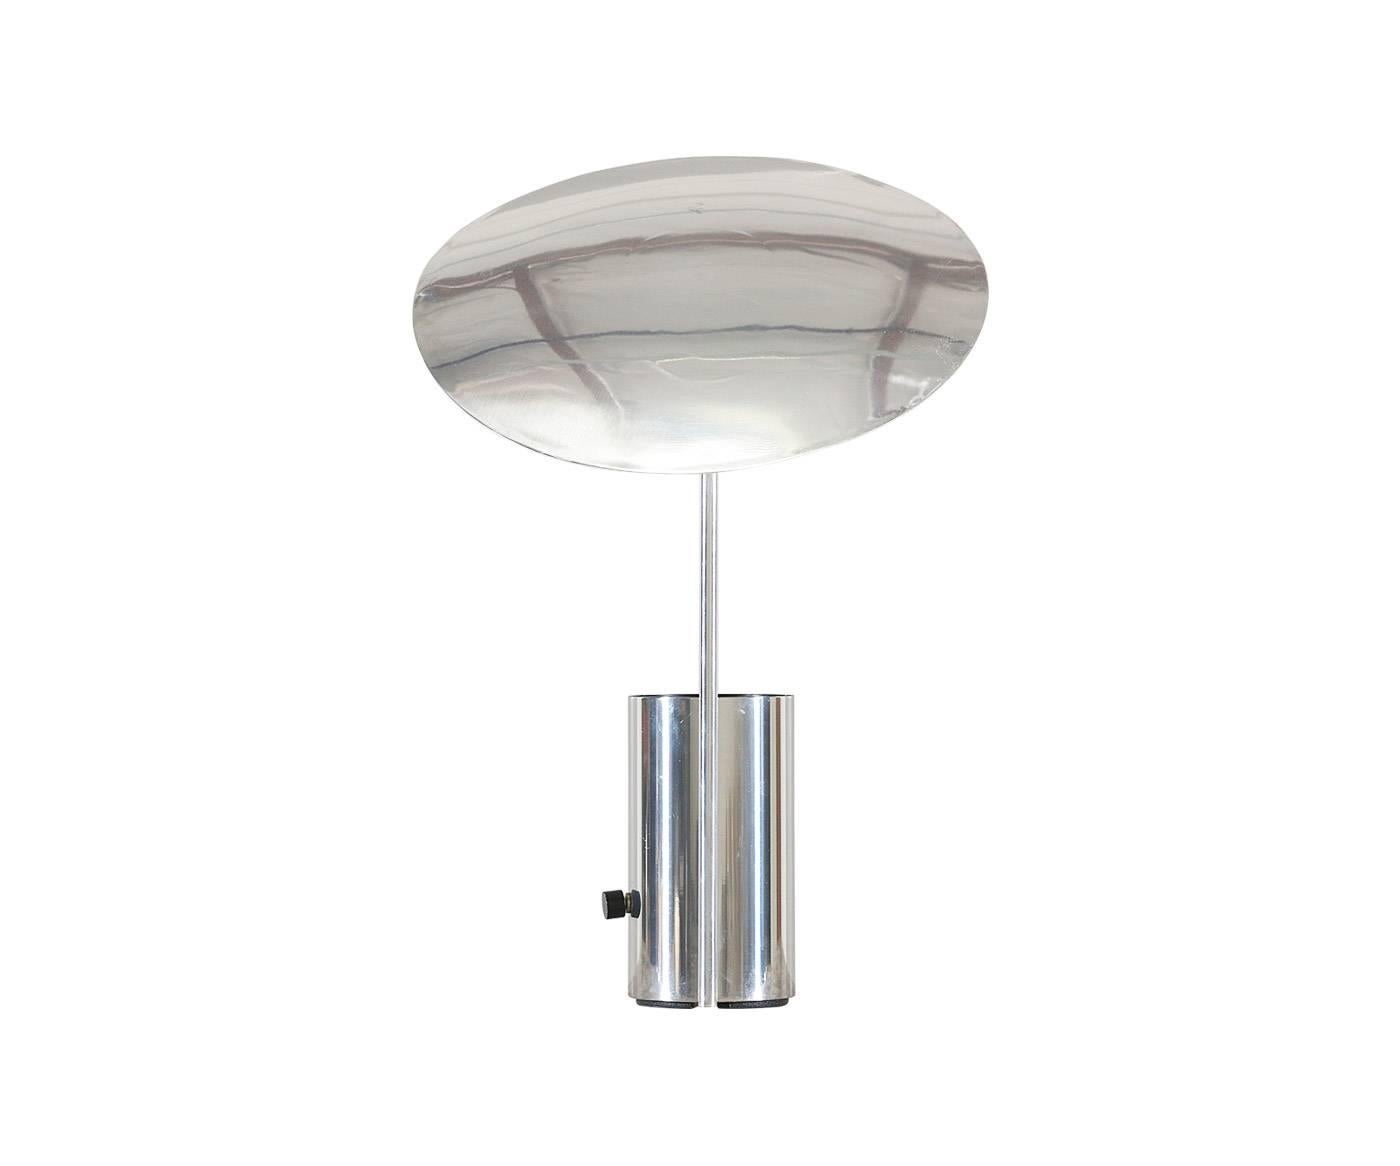 Mid-Century Modern George Nelson “Half-Nelson” Chrome Reflector Lamp for Koch and Lowy